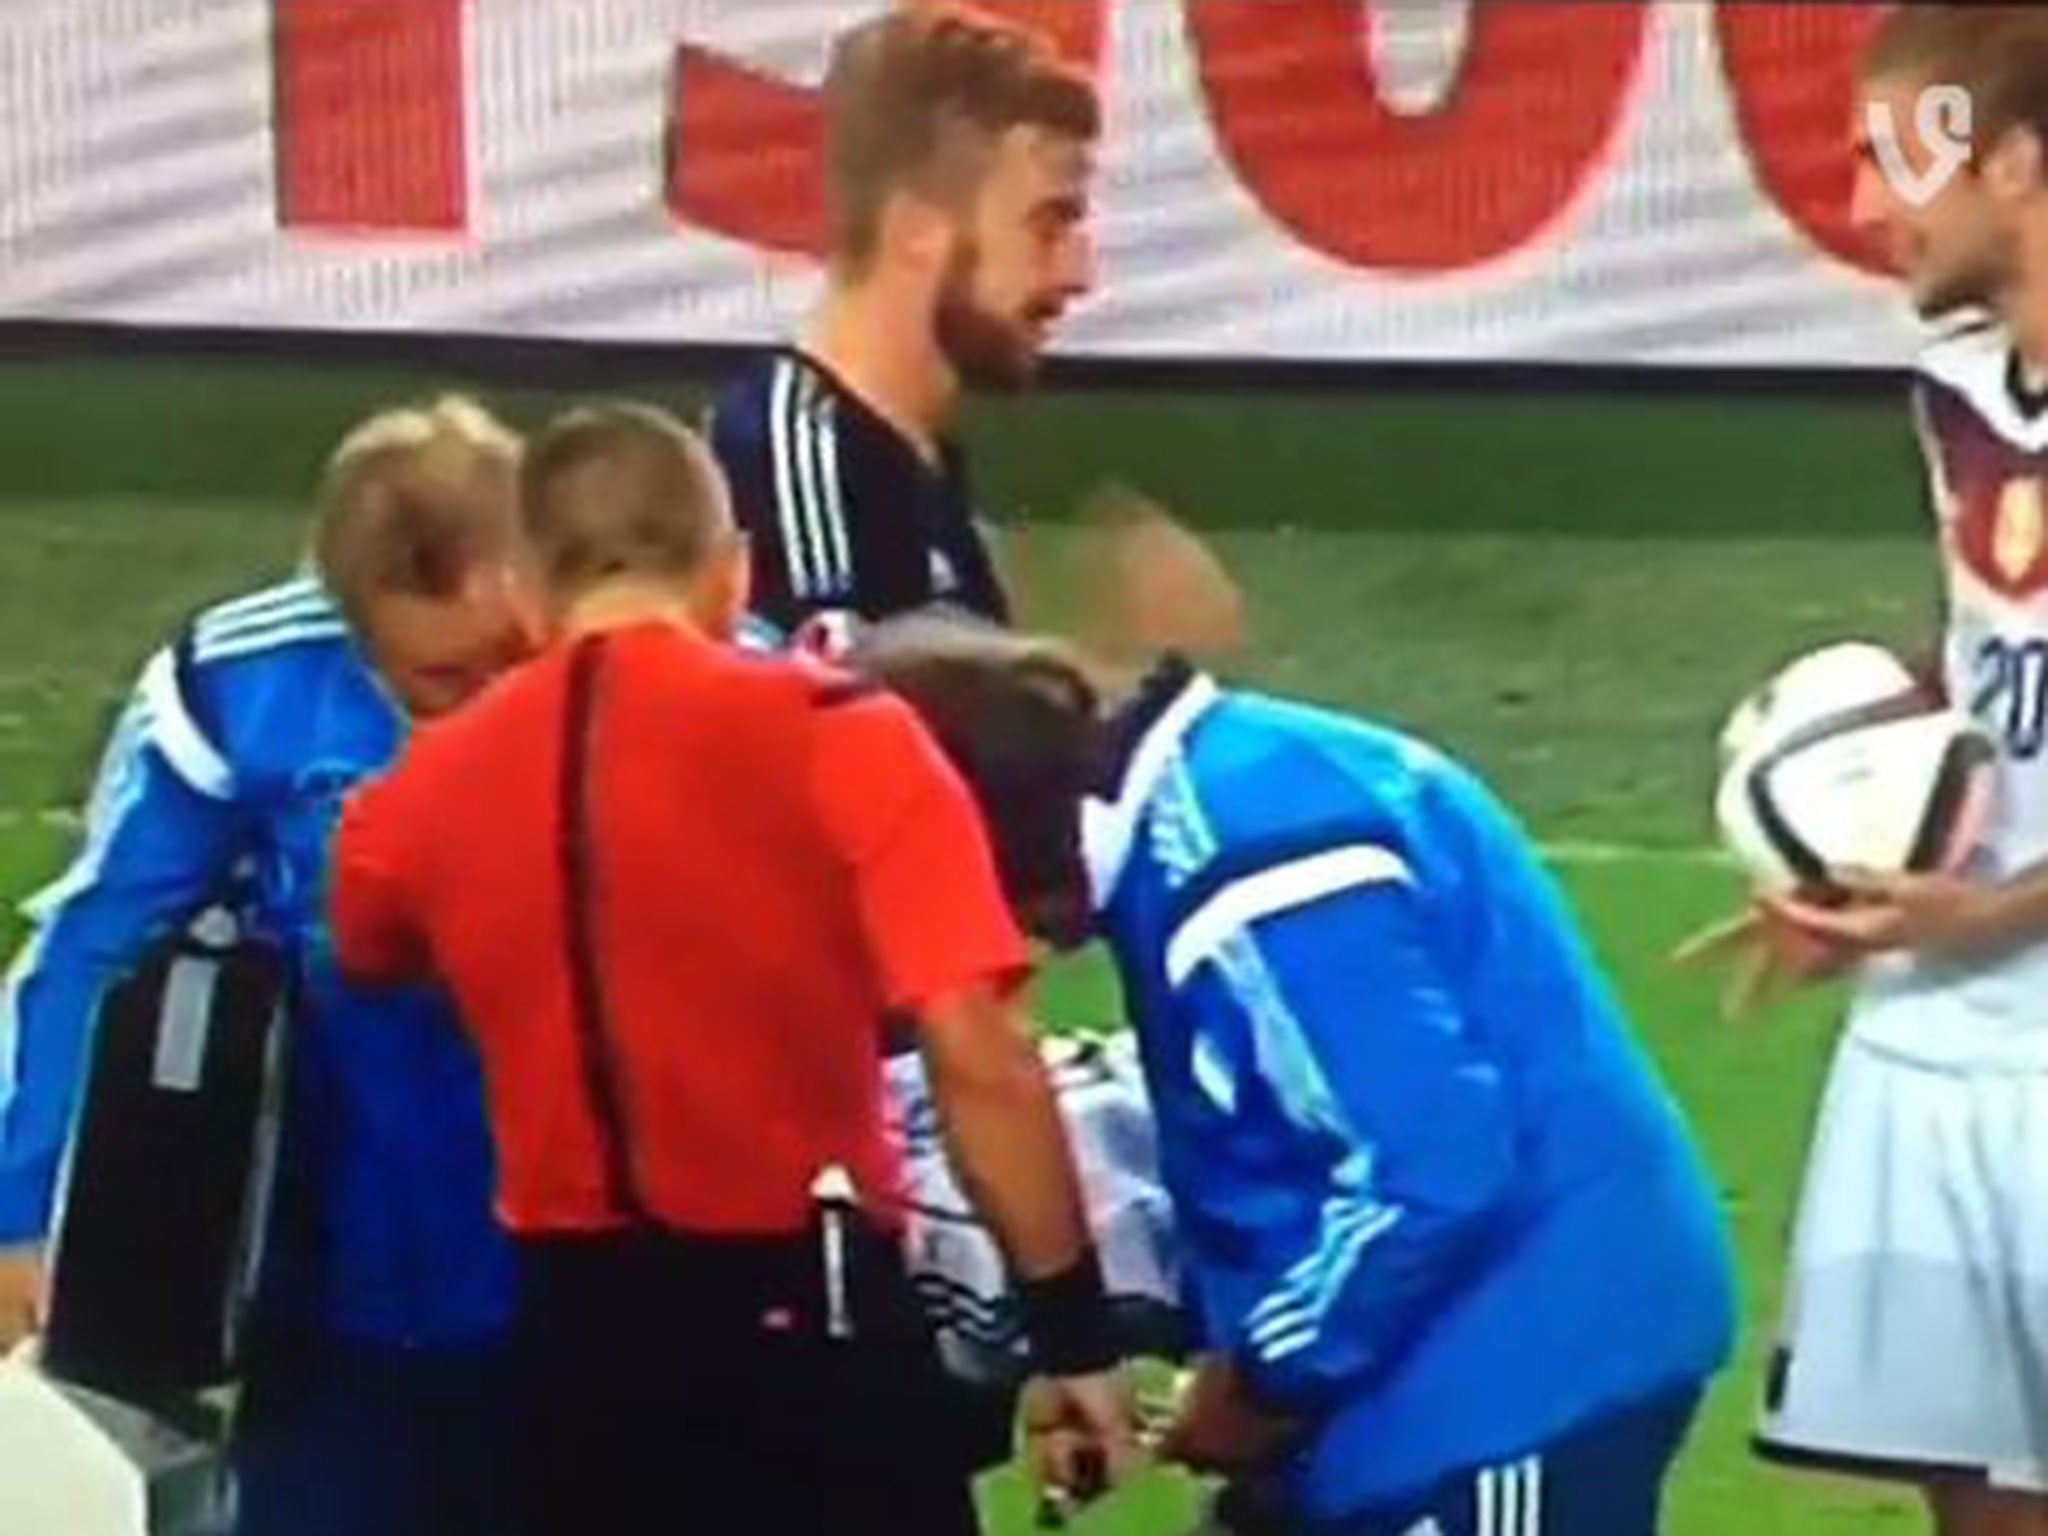 James Morrison (L) and Christoph Kramer (R) appear to play 'Rock, Paper, Scissors' during Germany's 2-1 win over Scotland